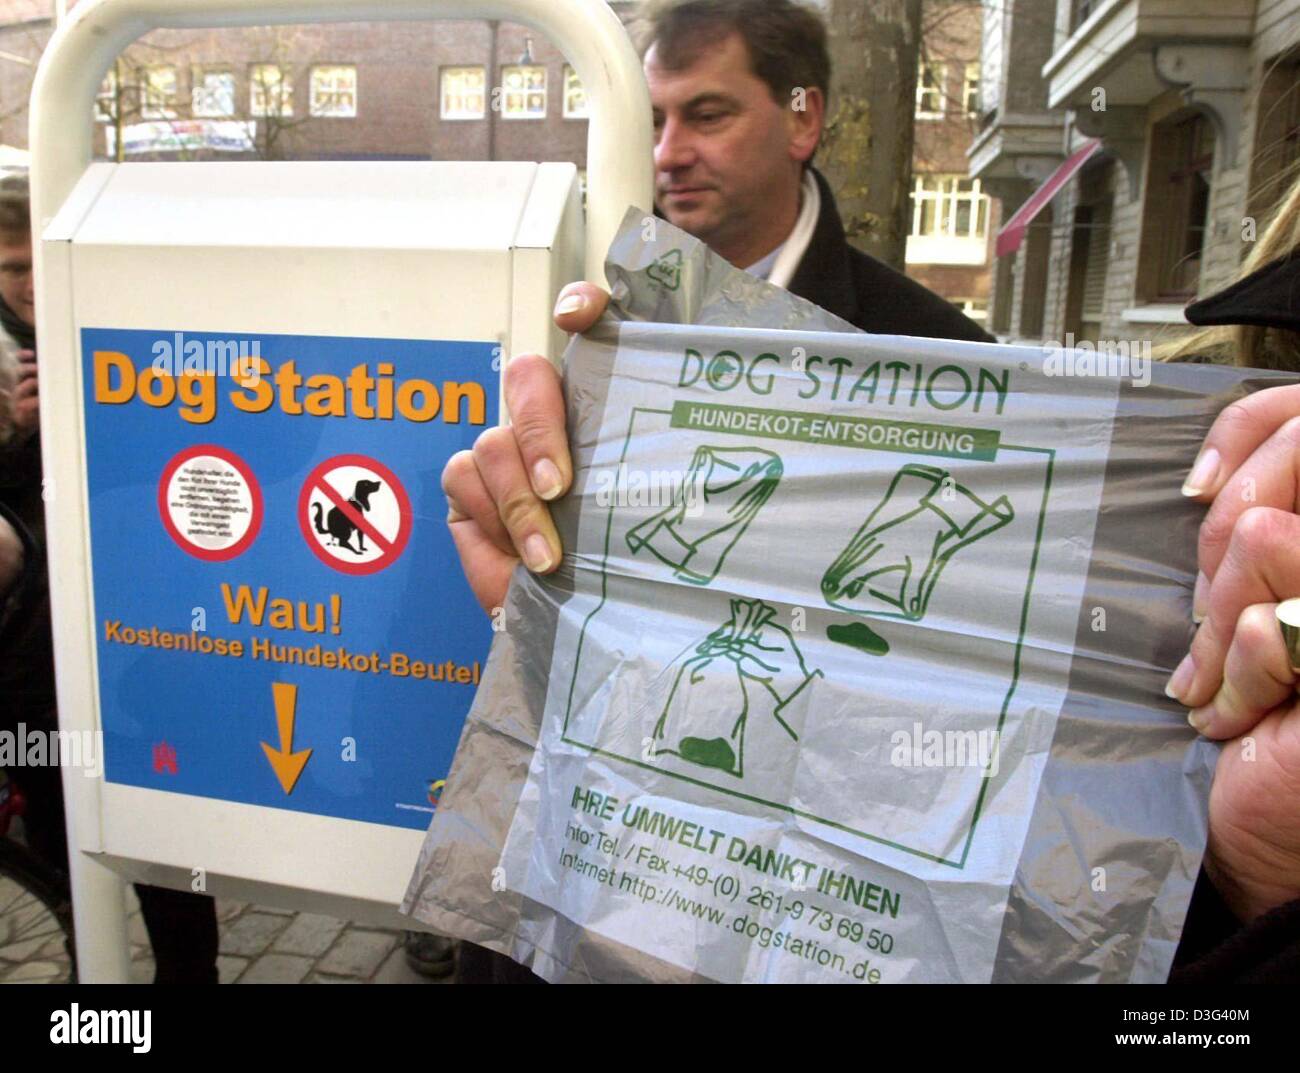 (dpa) - A person holds up a plastic bag next to a 'dog station' in Hamburg, northern Germany, 12 February 2003.  The plastic bags even have a diagram printed on them explaining their use.  The sign on the dog station reads 'Dog Station, Wau!, Kostenlose Hundekot-Beutel' ('Dog Station, Woof woof!, Free dog feces bags').  In the future, dog owners are supposed to use these bags to re Stock Photo